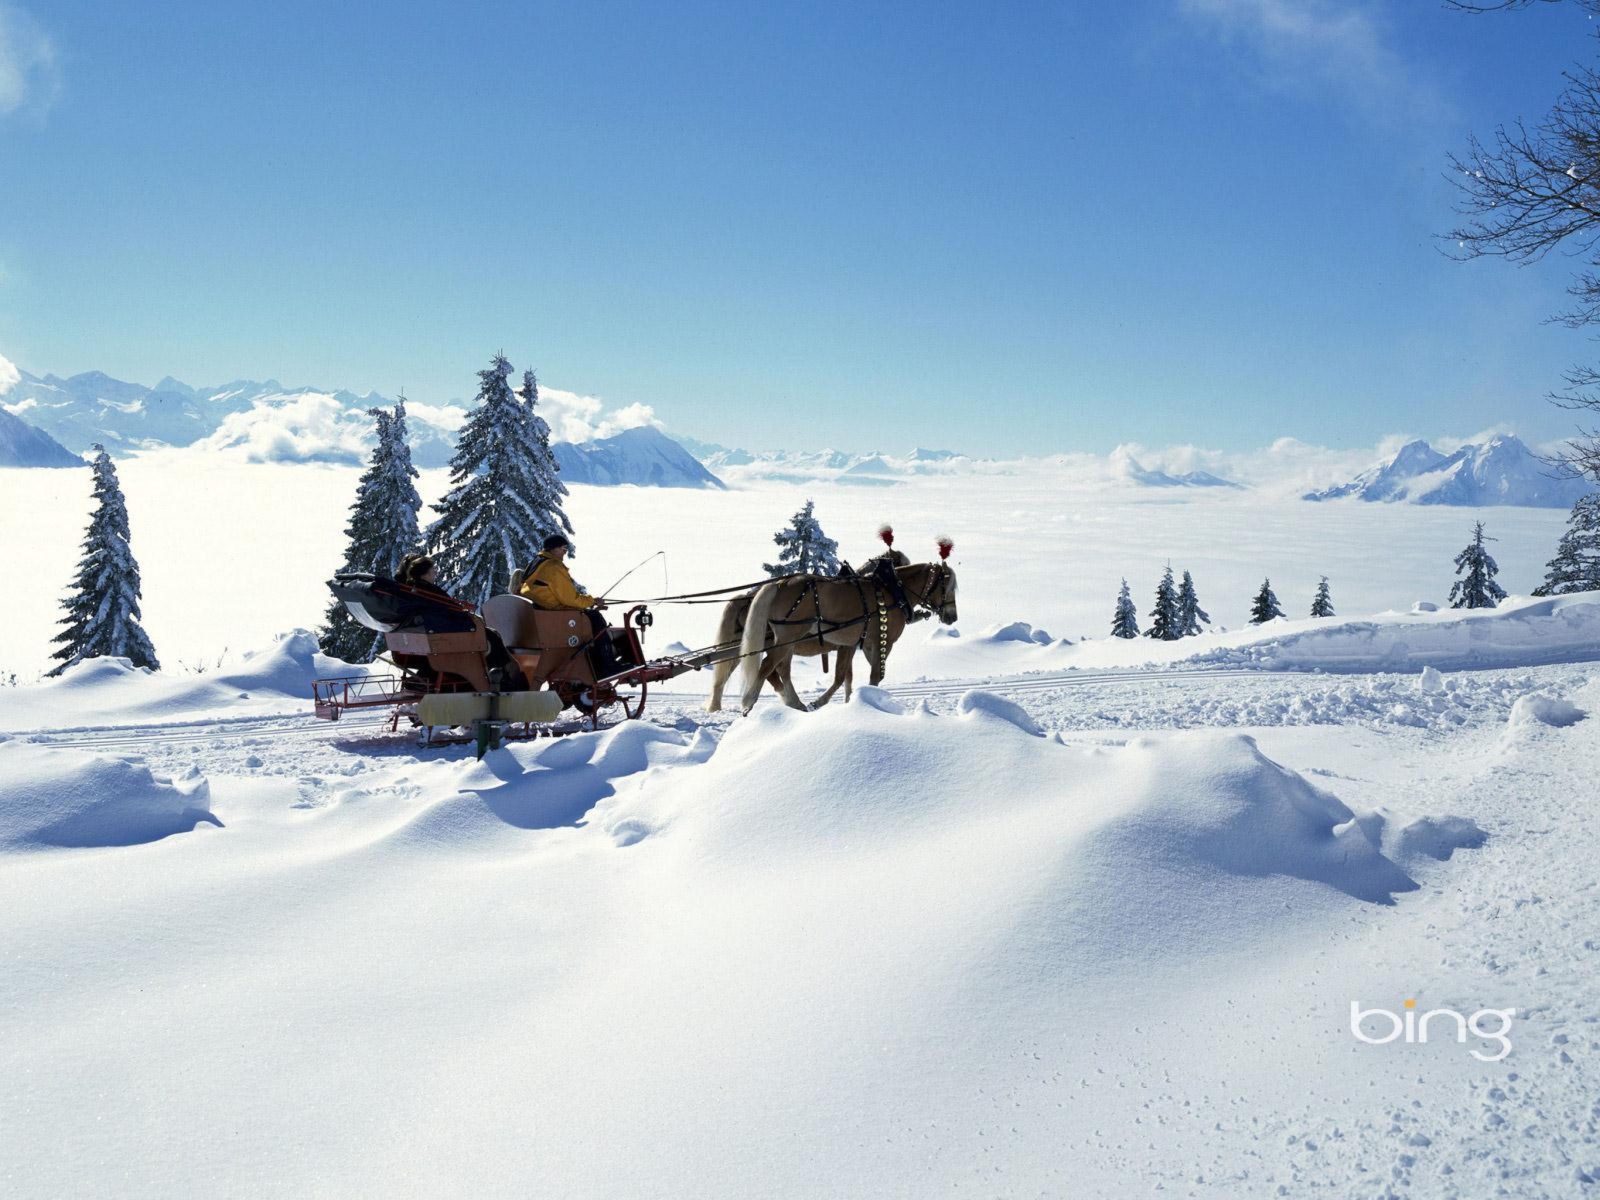 Winter Snow And Sleigh With Horses wallpaper 1600x1200